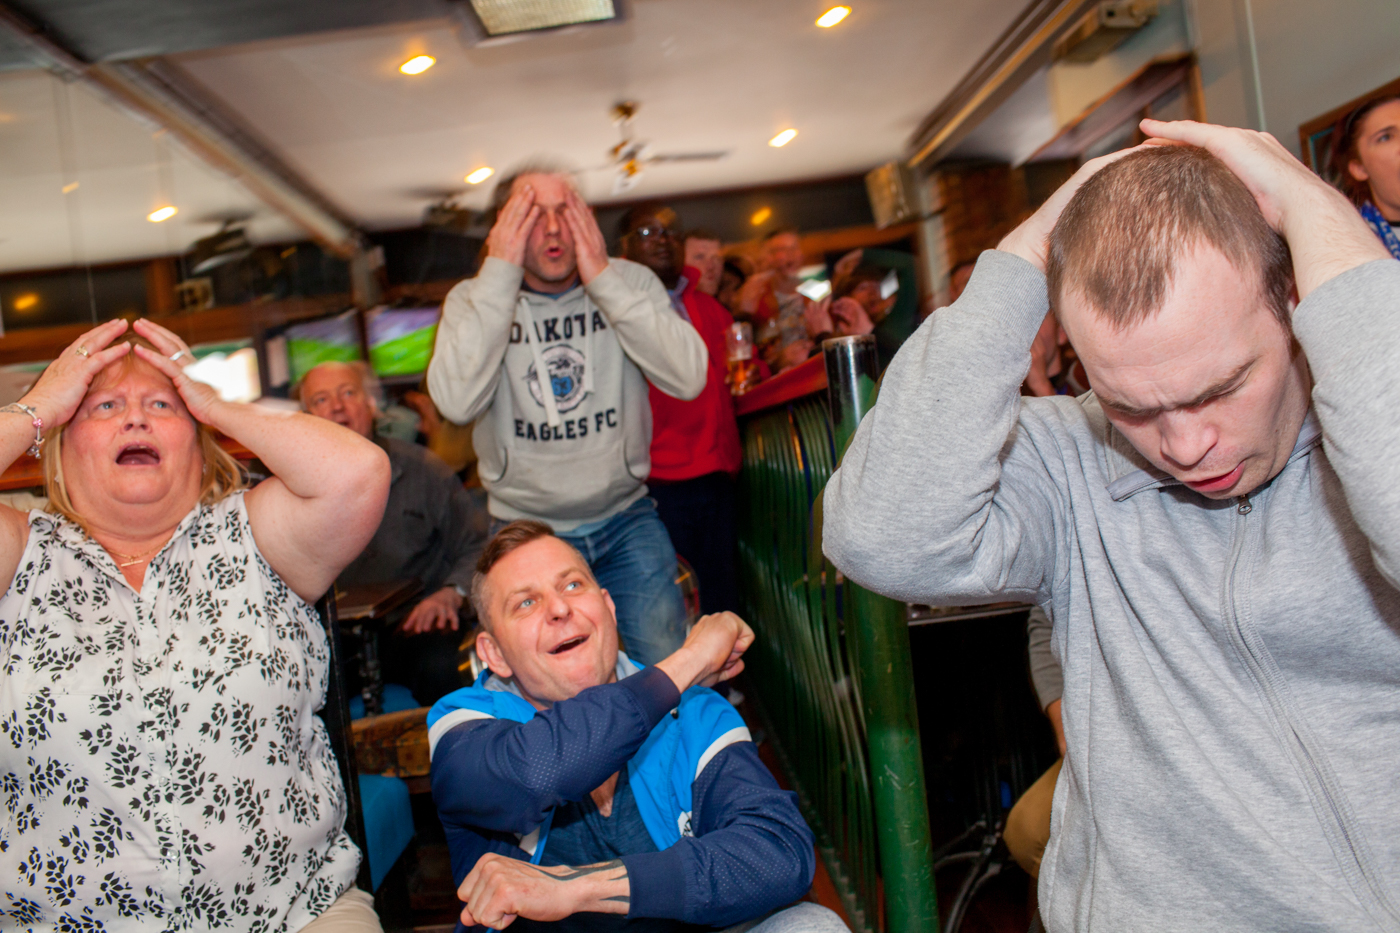 LEICESTER, UK MAY 2016Leicester City football fans watch their team playing away at MAnchester United on the television in the Oasis Bar located on Narborough Road.Narborough Road, one of the main avenues into the city, was named the most diverse street in Britain by researchers. Shopkeepers and small business owners from 23 nations work there.On the 2nd May 2016, Leicester City football club became champions of England for the first time in their 132 year history.Leicester has been dubbed as most multicultural diversified city in England, thanks to scores of people that have flocked the city and who have hailed from different parts of the world. According to the Leicester city council, the city has the highest number of immigrants who have sought both temporary and permanent residence in England. Majority of these immigrants are people who have left their home countries in pursuit of job opportunities in England.  Photo by Peter Dench/Getty Images Assignment for ESPN